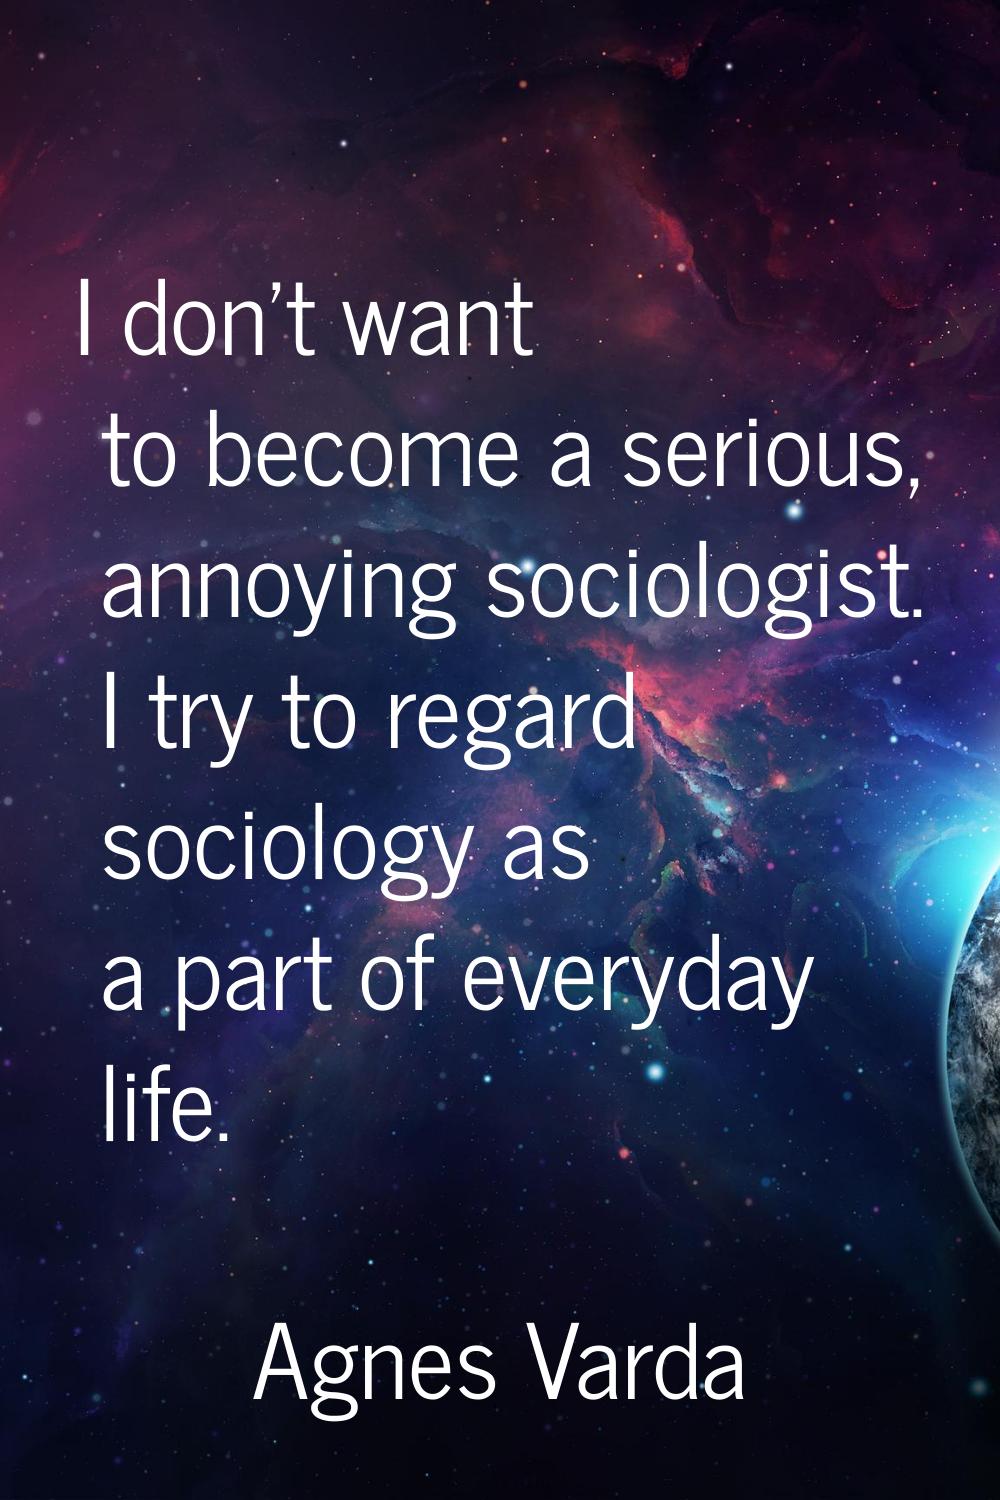 I don't want to become a serious, annoying sociologist. I try to regard sociology as a part of ever